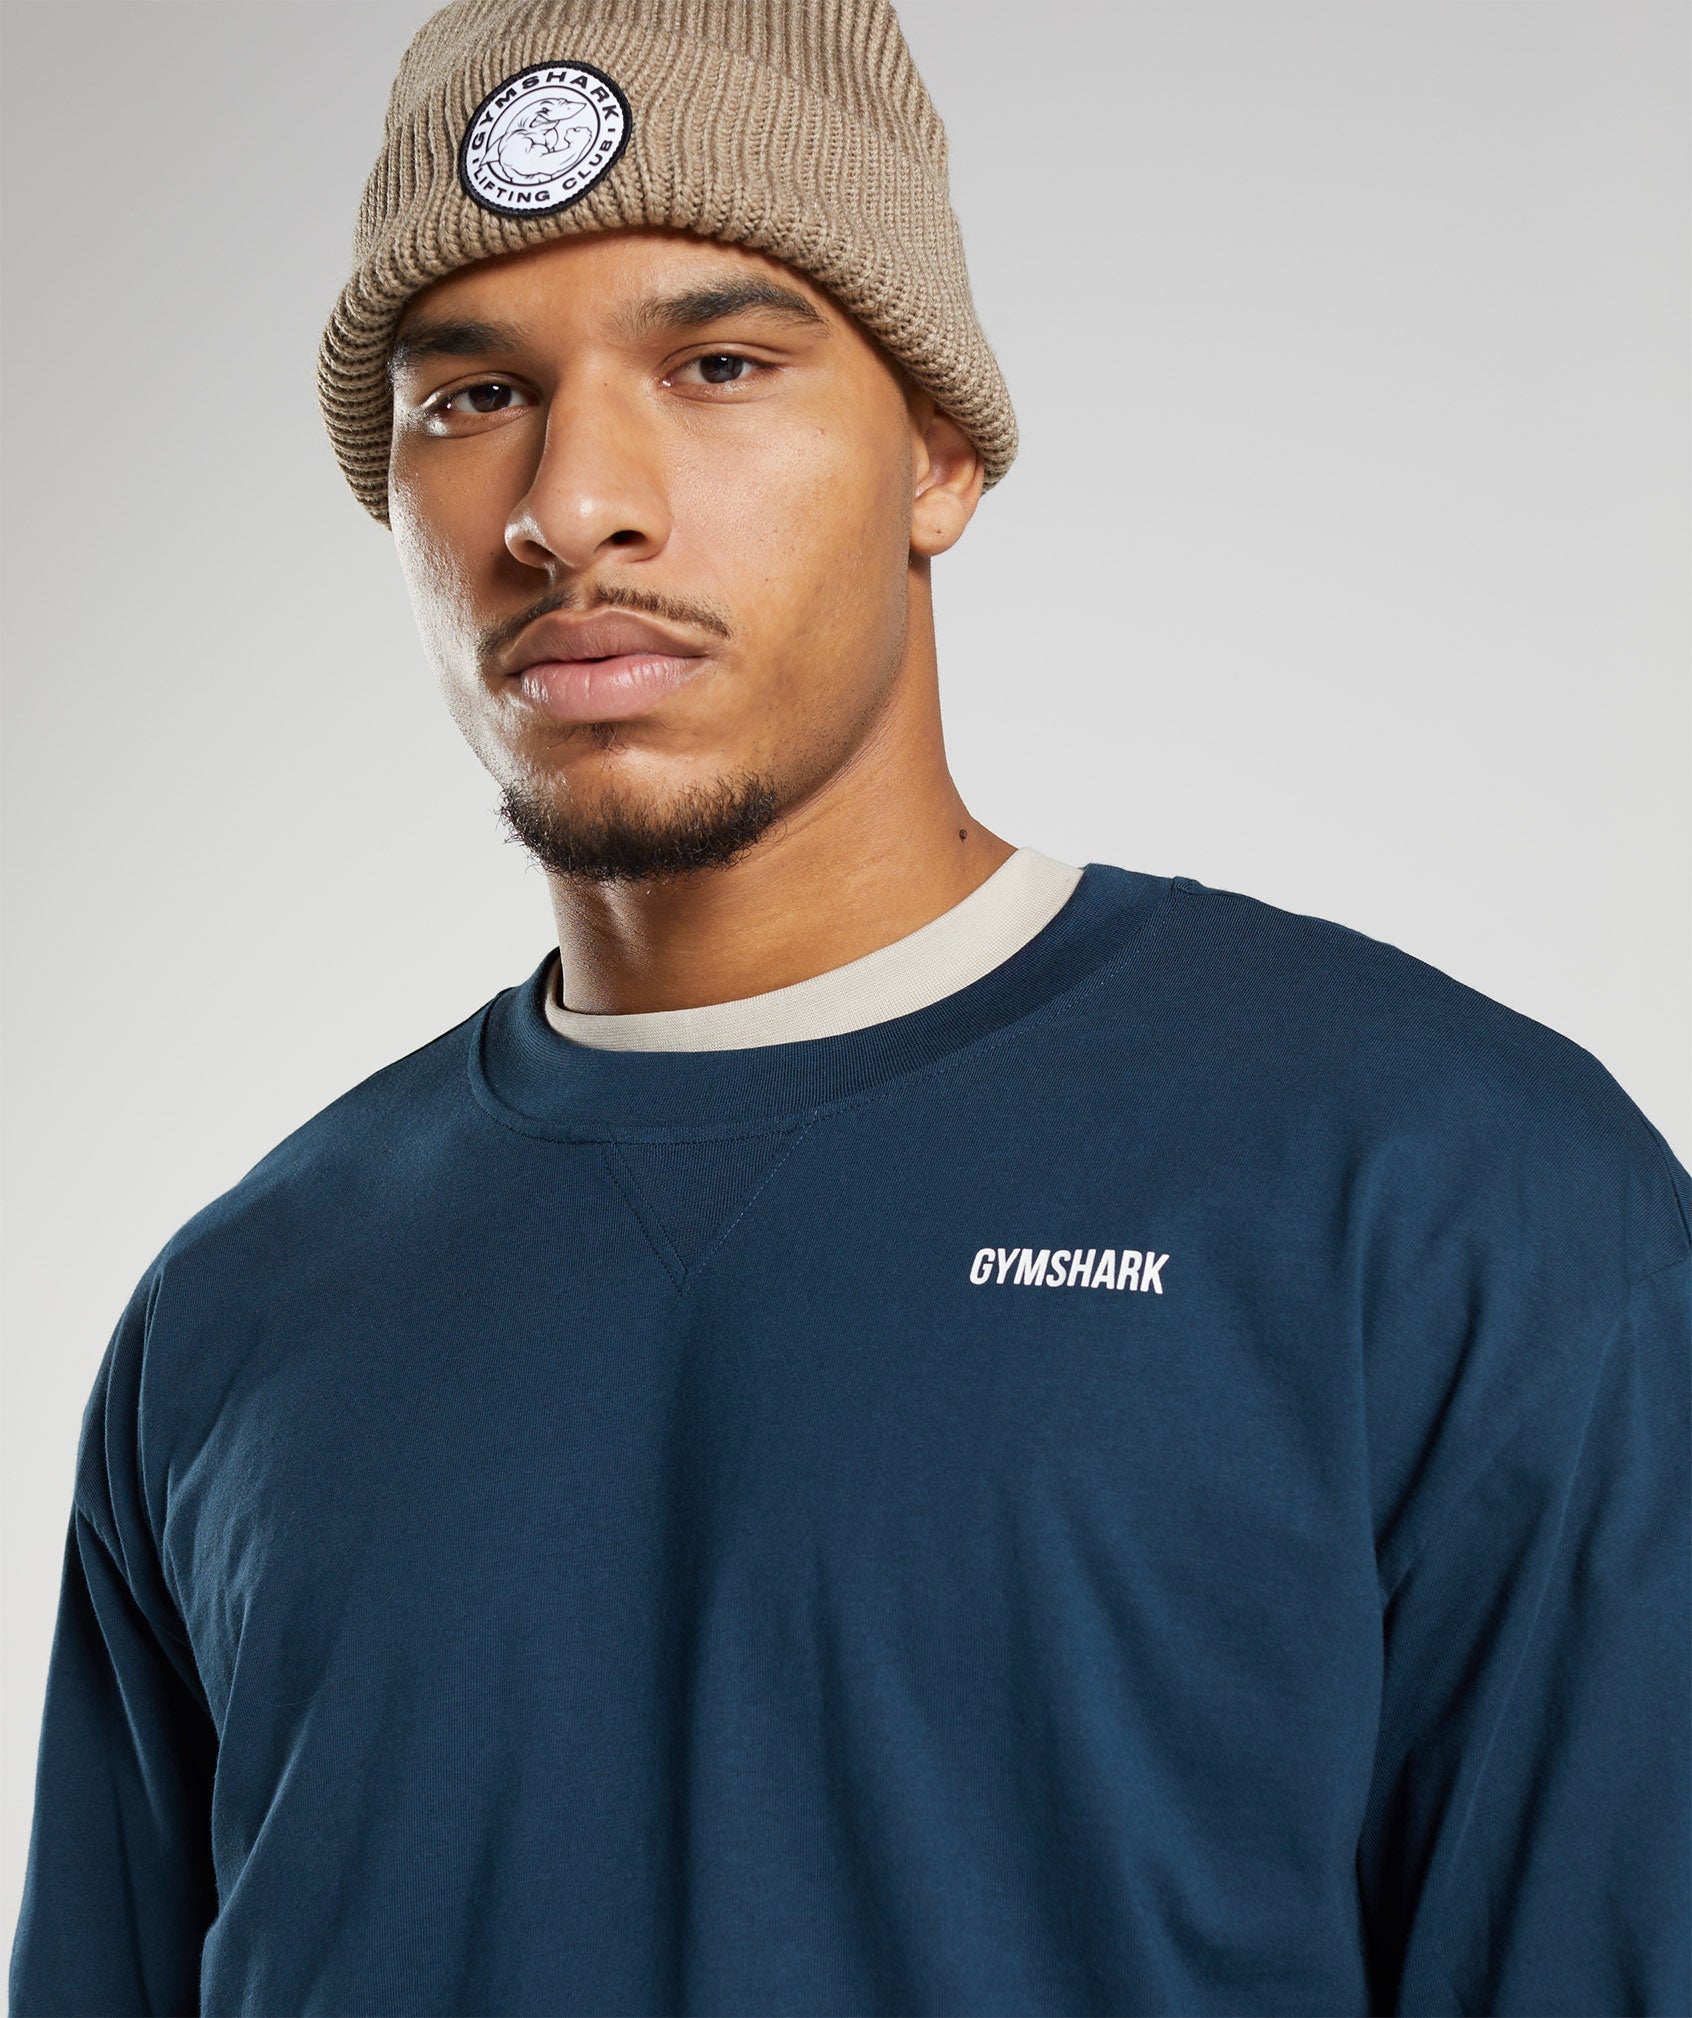 Rest Day Sweats Long Sleeve T-Shirt in Navy - view 6